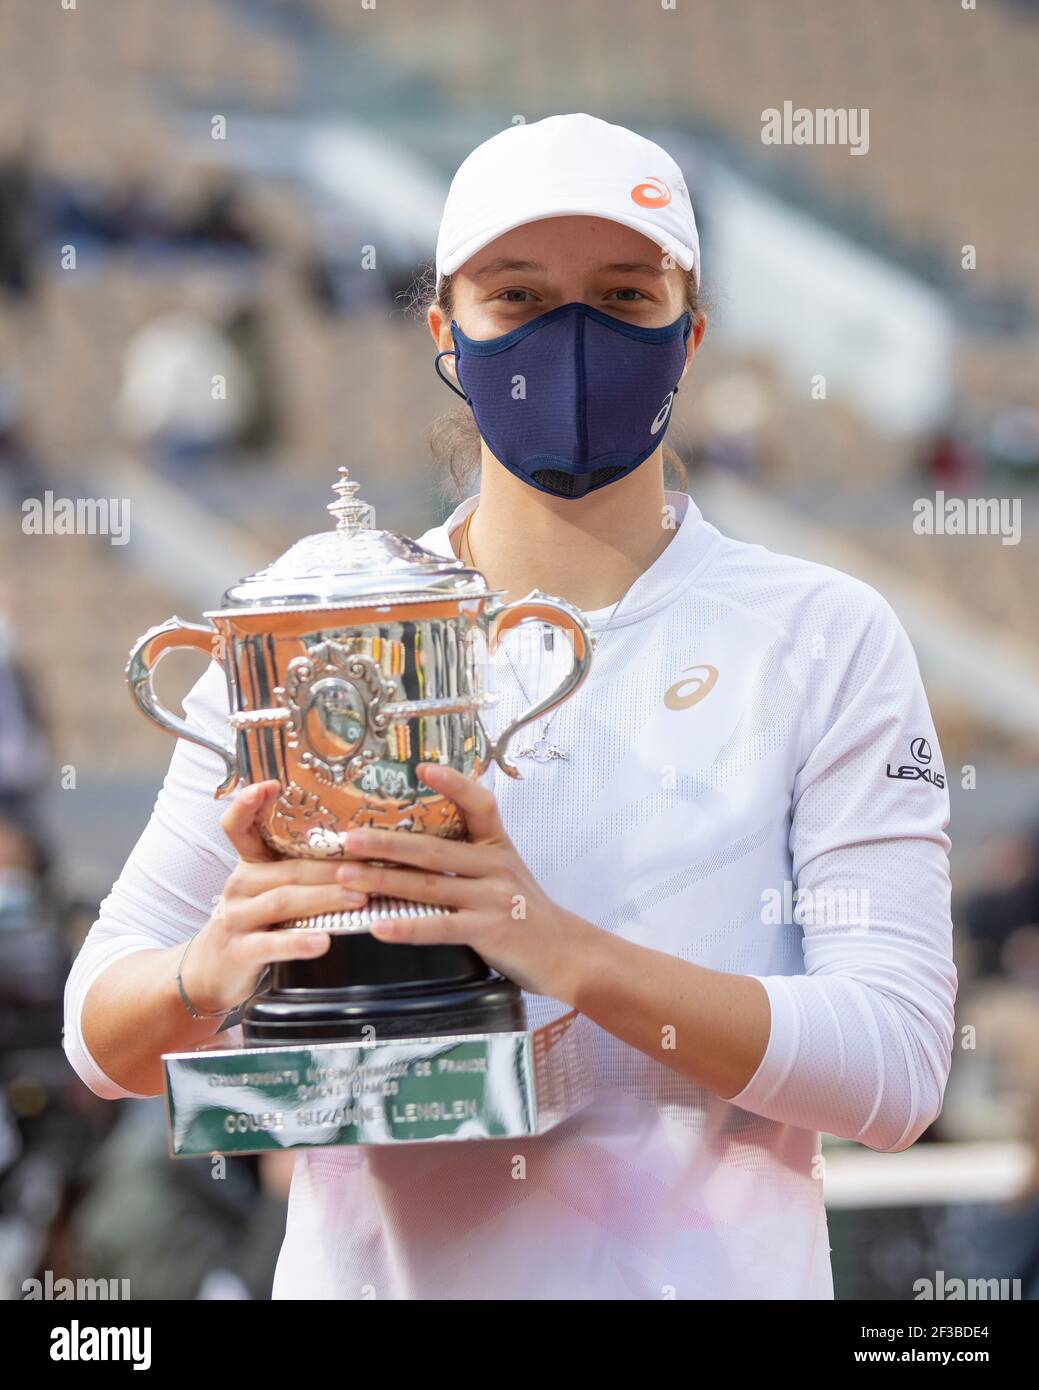 Polish tennis player Iga Swiatek  presenting her trophy at the French Open 2020 tournament, Paris, France. Stock Photo